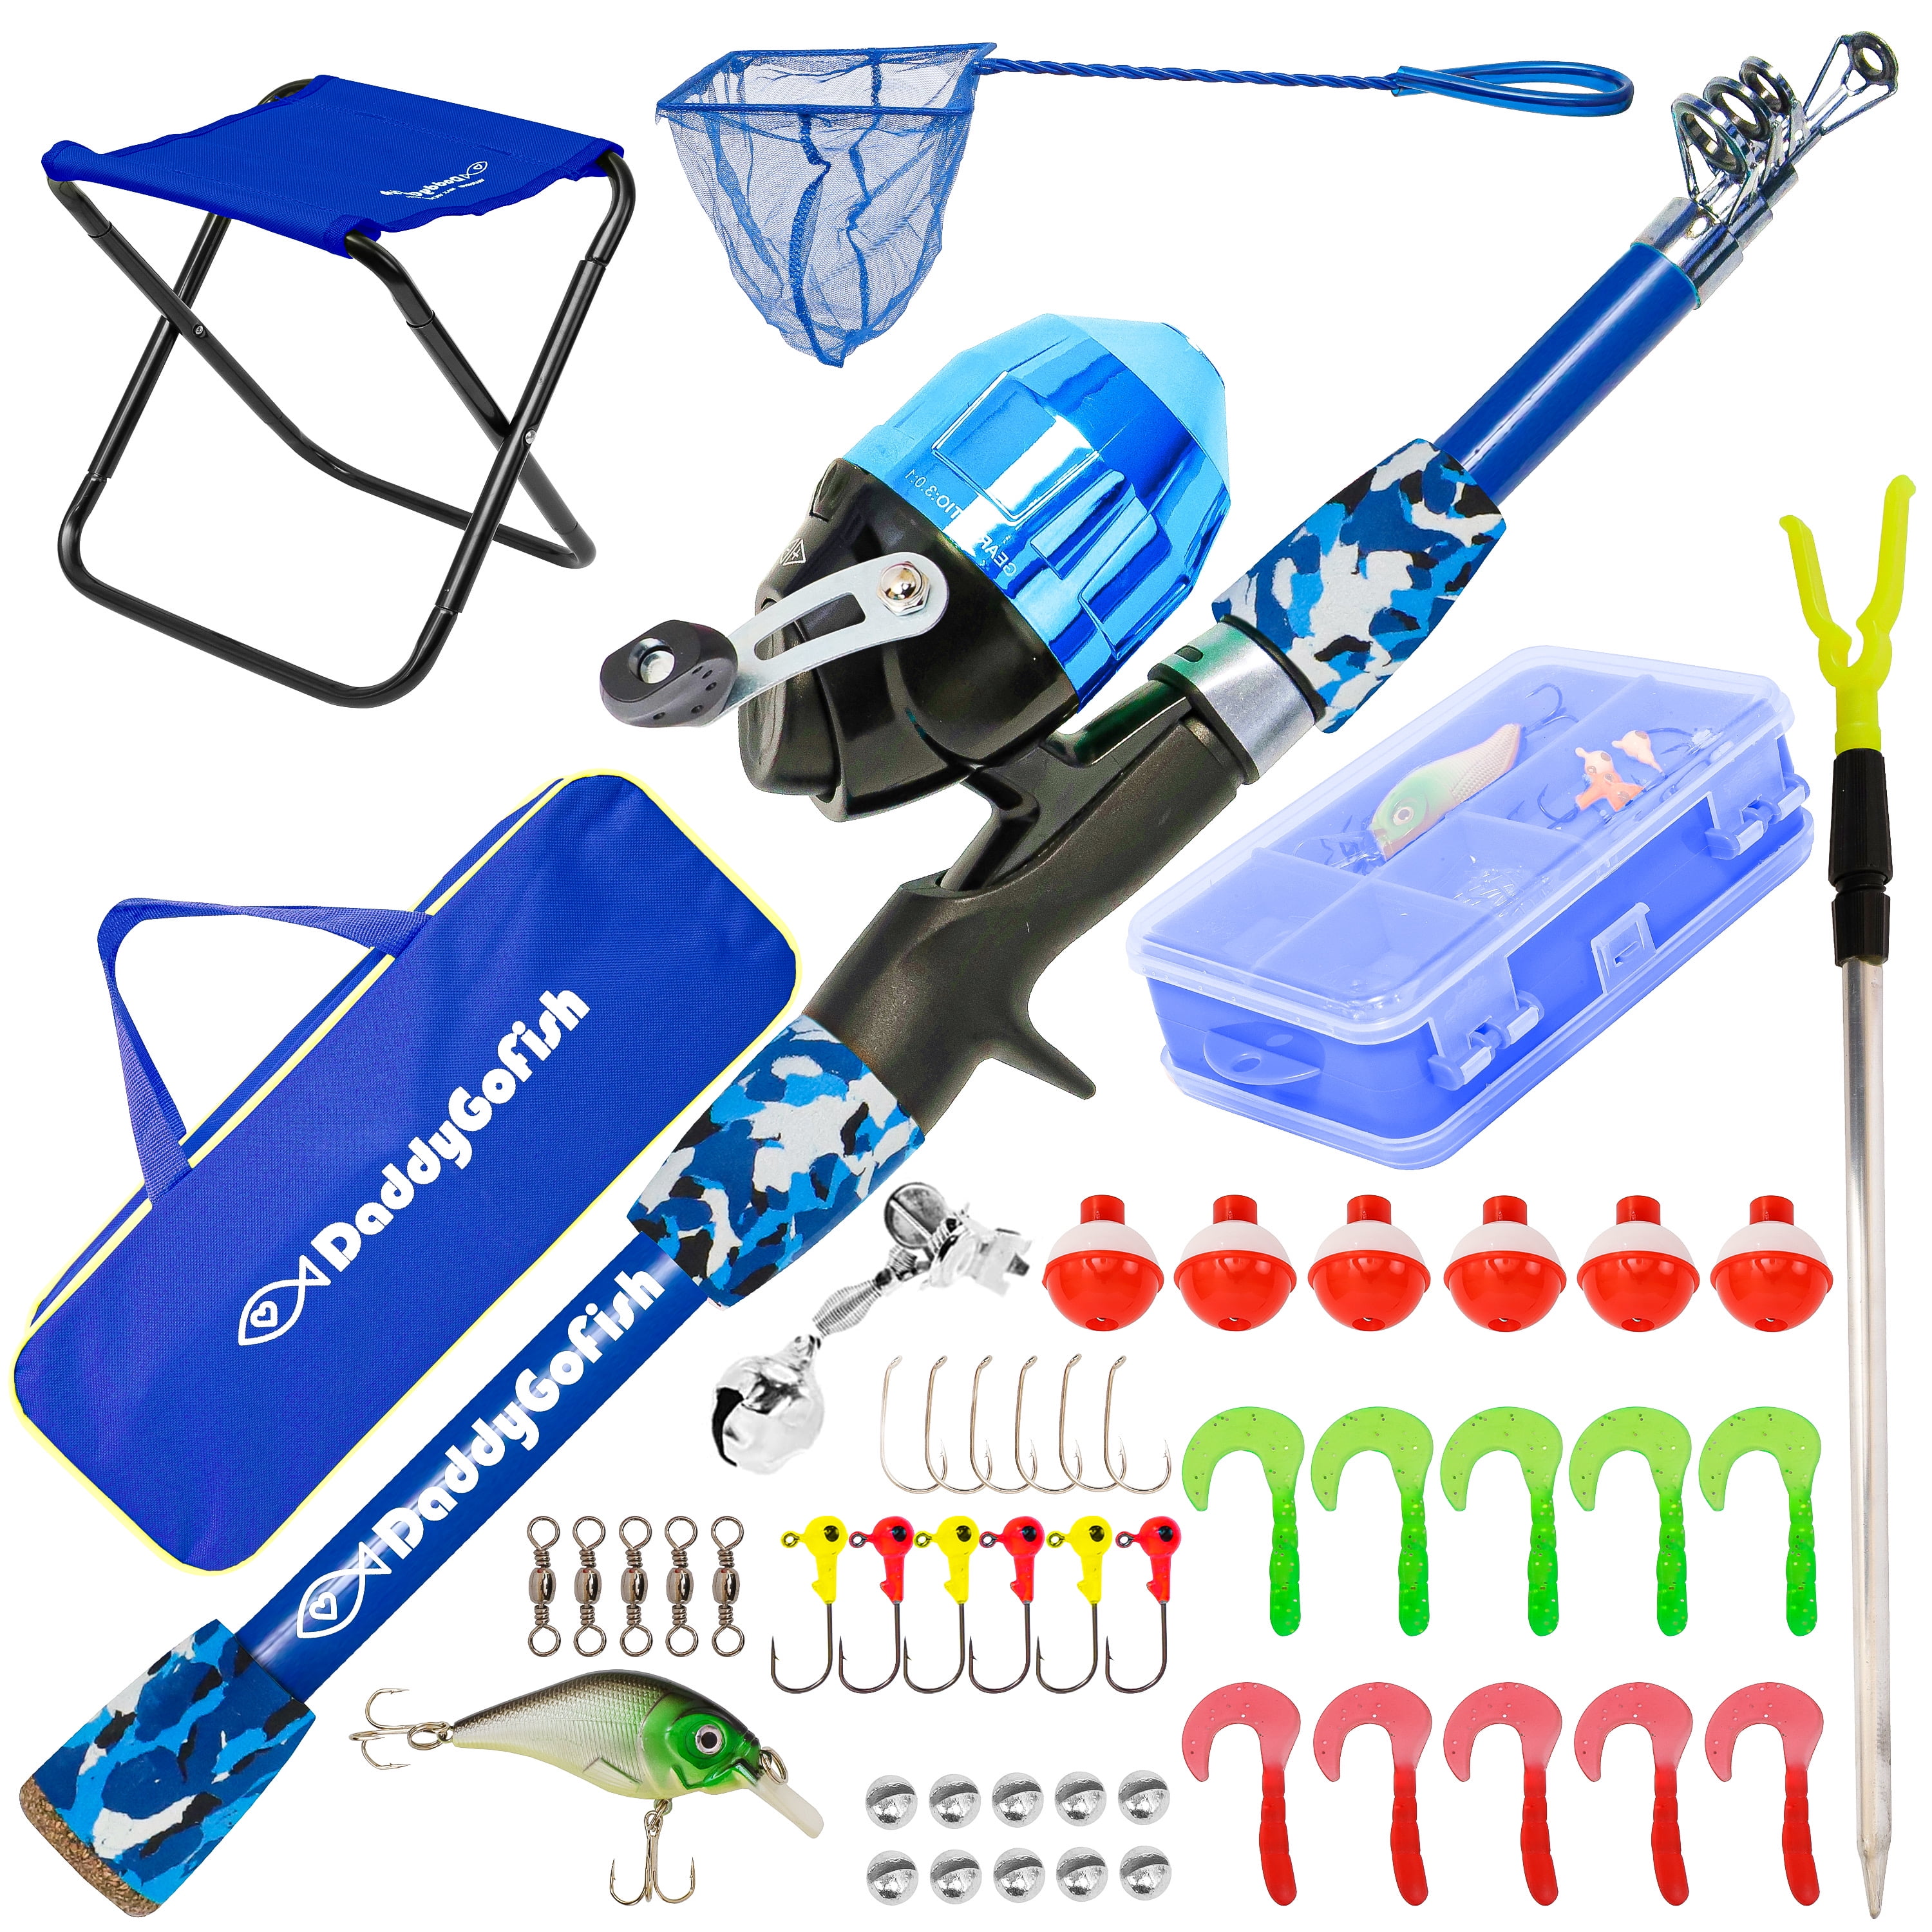 PLUSINNO Kids Fishing Pole - Kids Fishing Rod Reel Combo Starter Kit - with  Tackle Box, Practice Plug, Beginner's Guide and Travel Bag for Boys, Girls